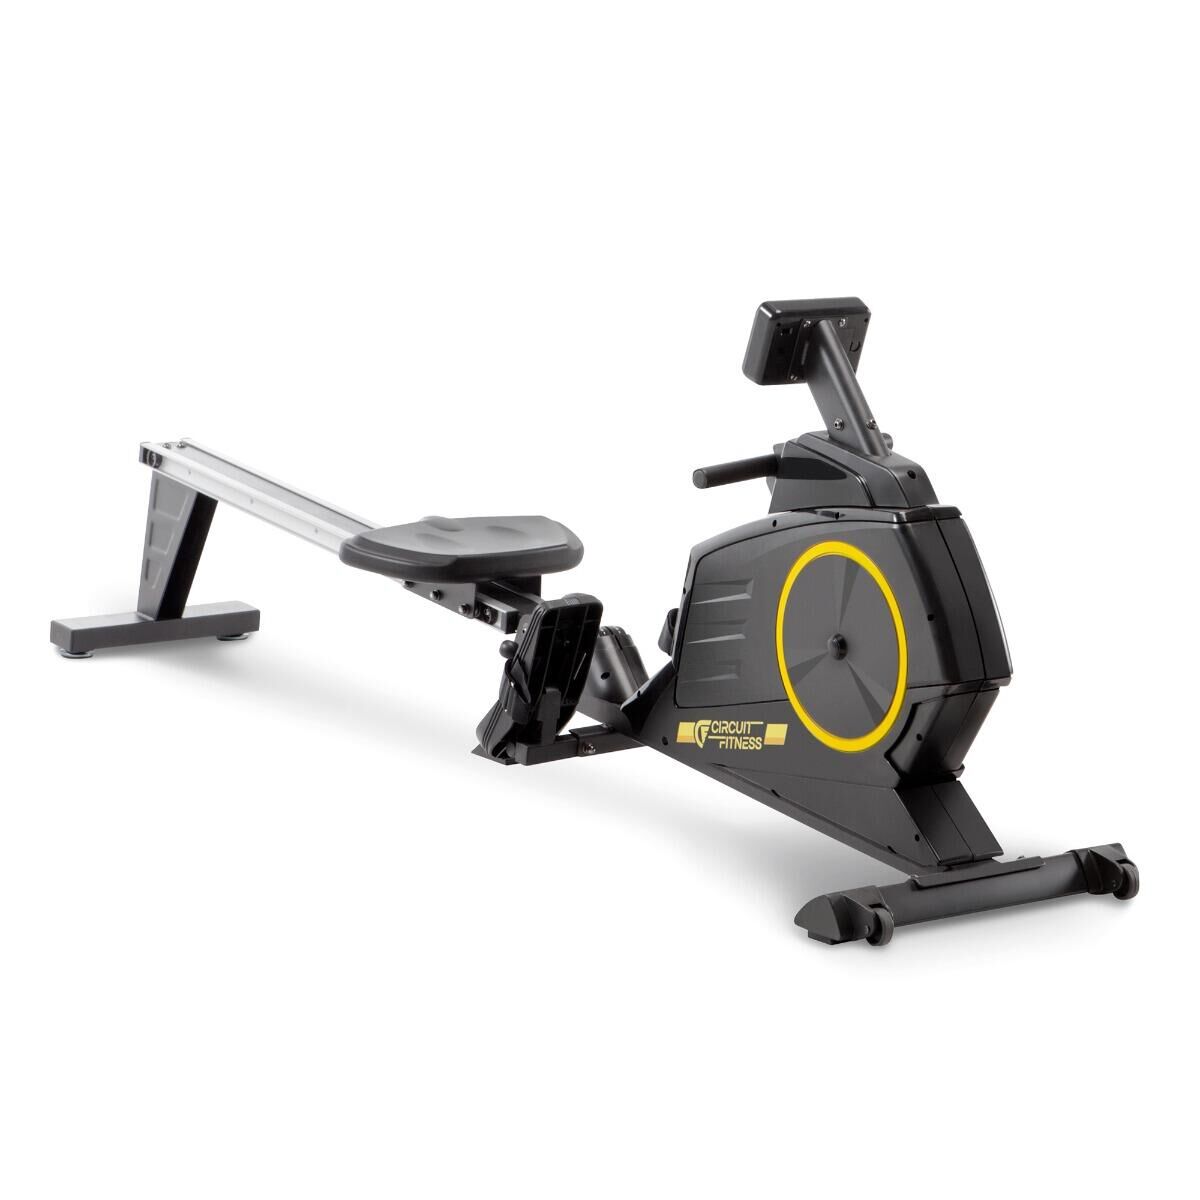 CIRCUIT FITNESS CIRCUIT FITNESS AMZ-986RW DELUXE FOLDABLE MAGNETIC ROWER